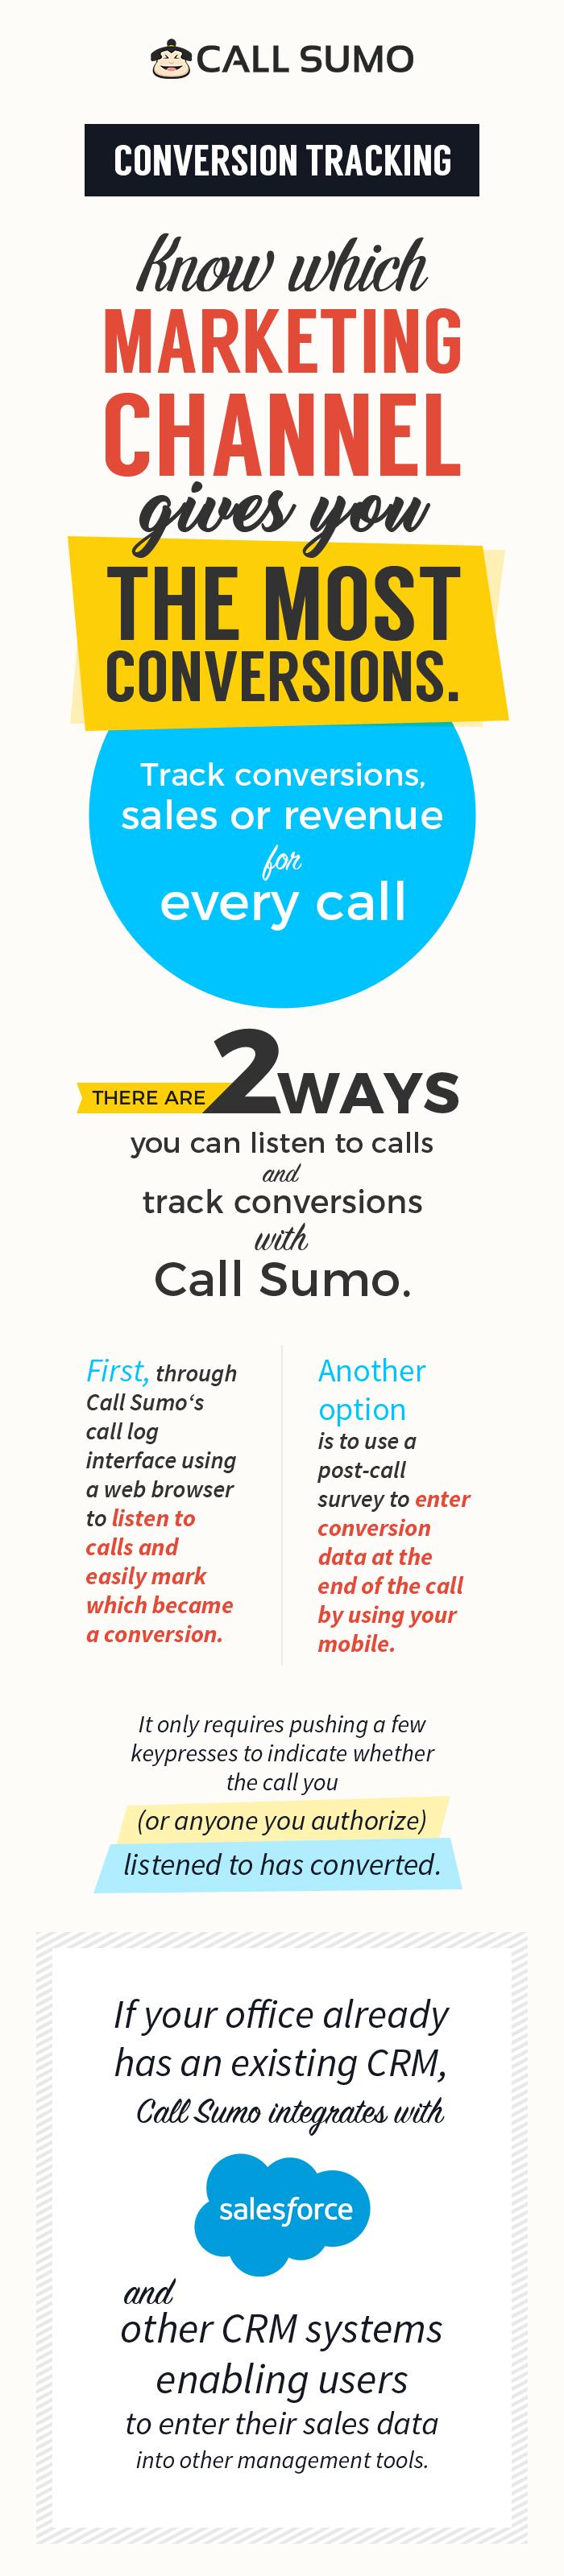 Set Up Conversion Tracking & Sales for Every Call With Call Sumo